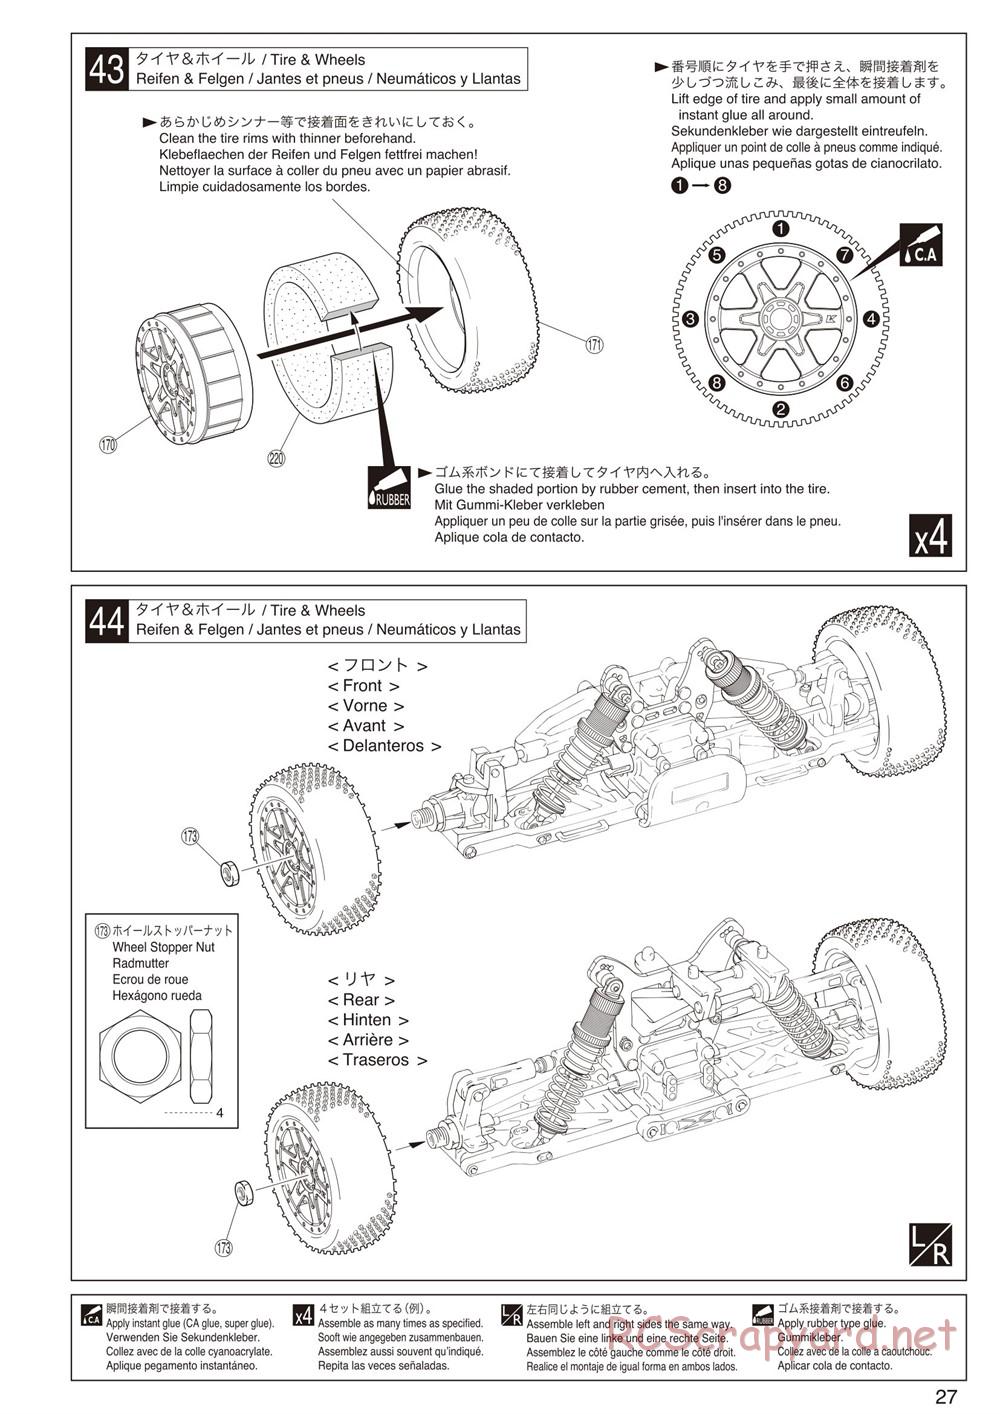 Kyosho - Inferno Neo 2.0 - Manual - Page 27